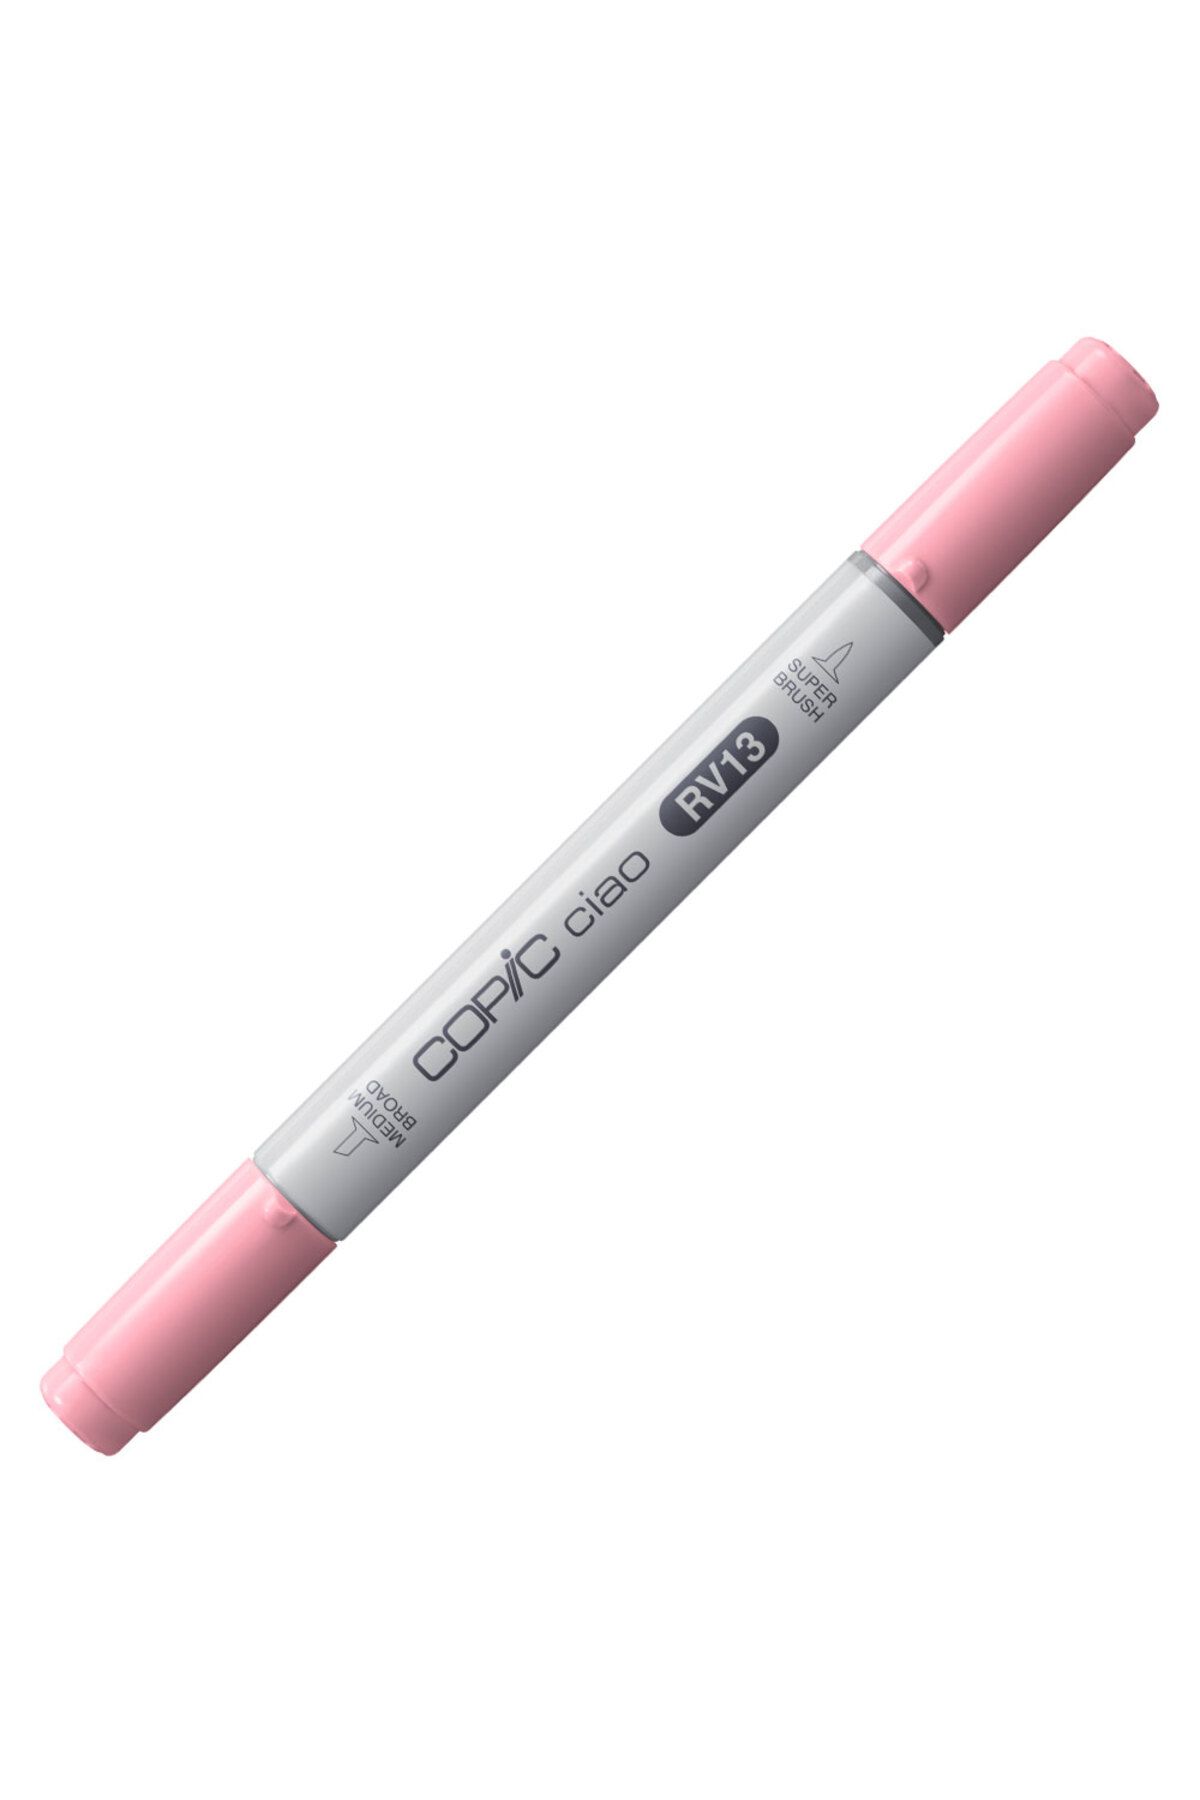 copic Ciao Marker Kalem Rv13 Tender Pink 22 075 178